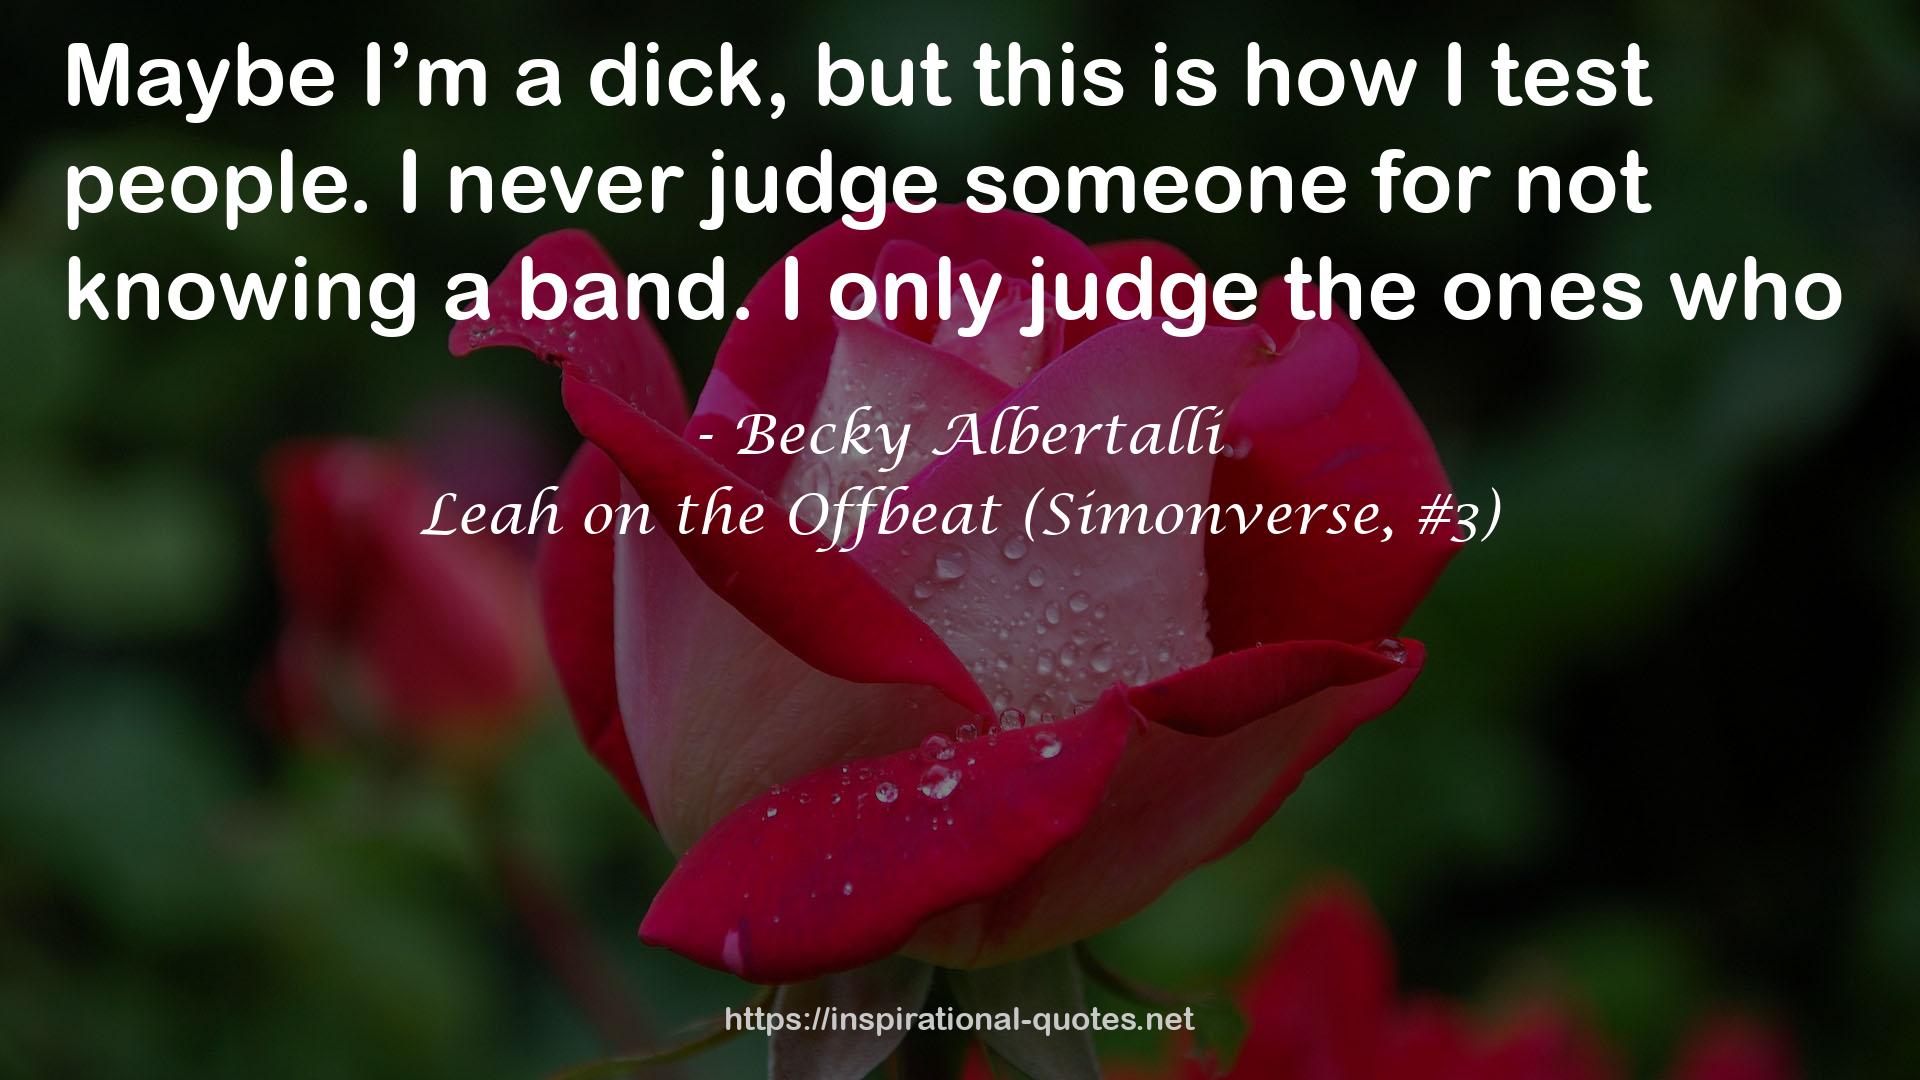 Leah on the Offbeat (Simonverse, #3) QUOTES